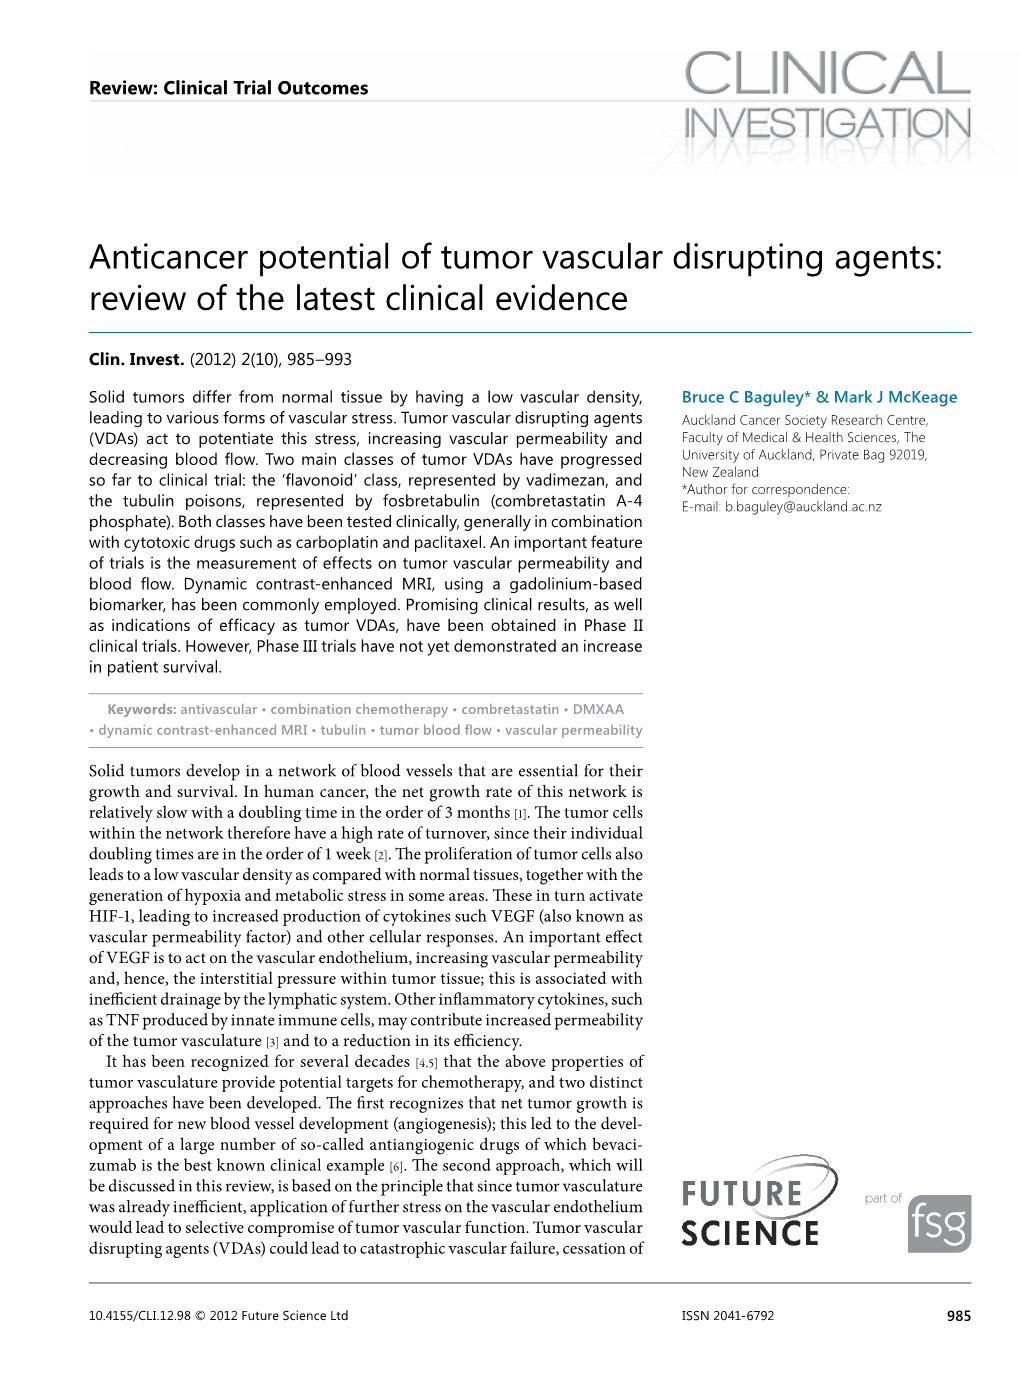 Anti-Cancer Potential of Tumor-Vascular Disrupting Agents